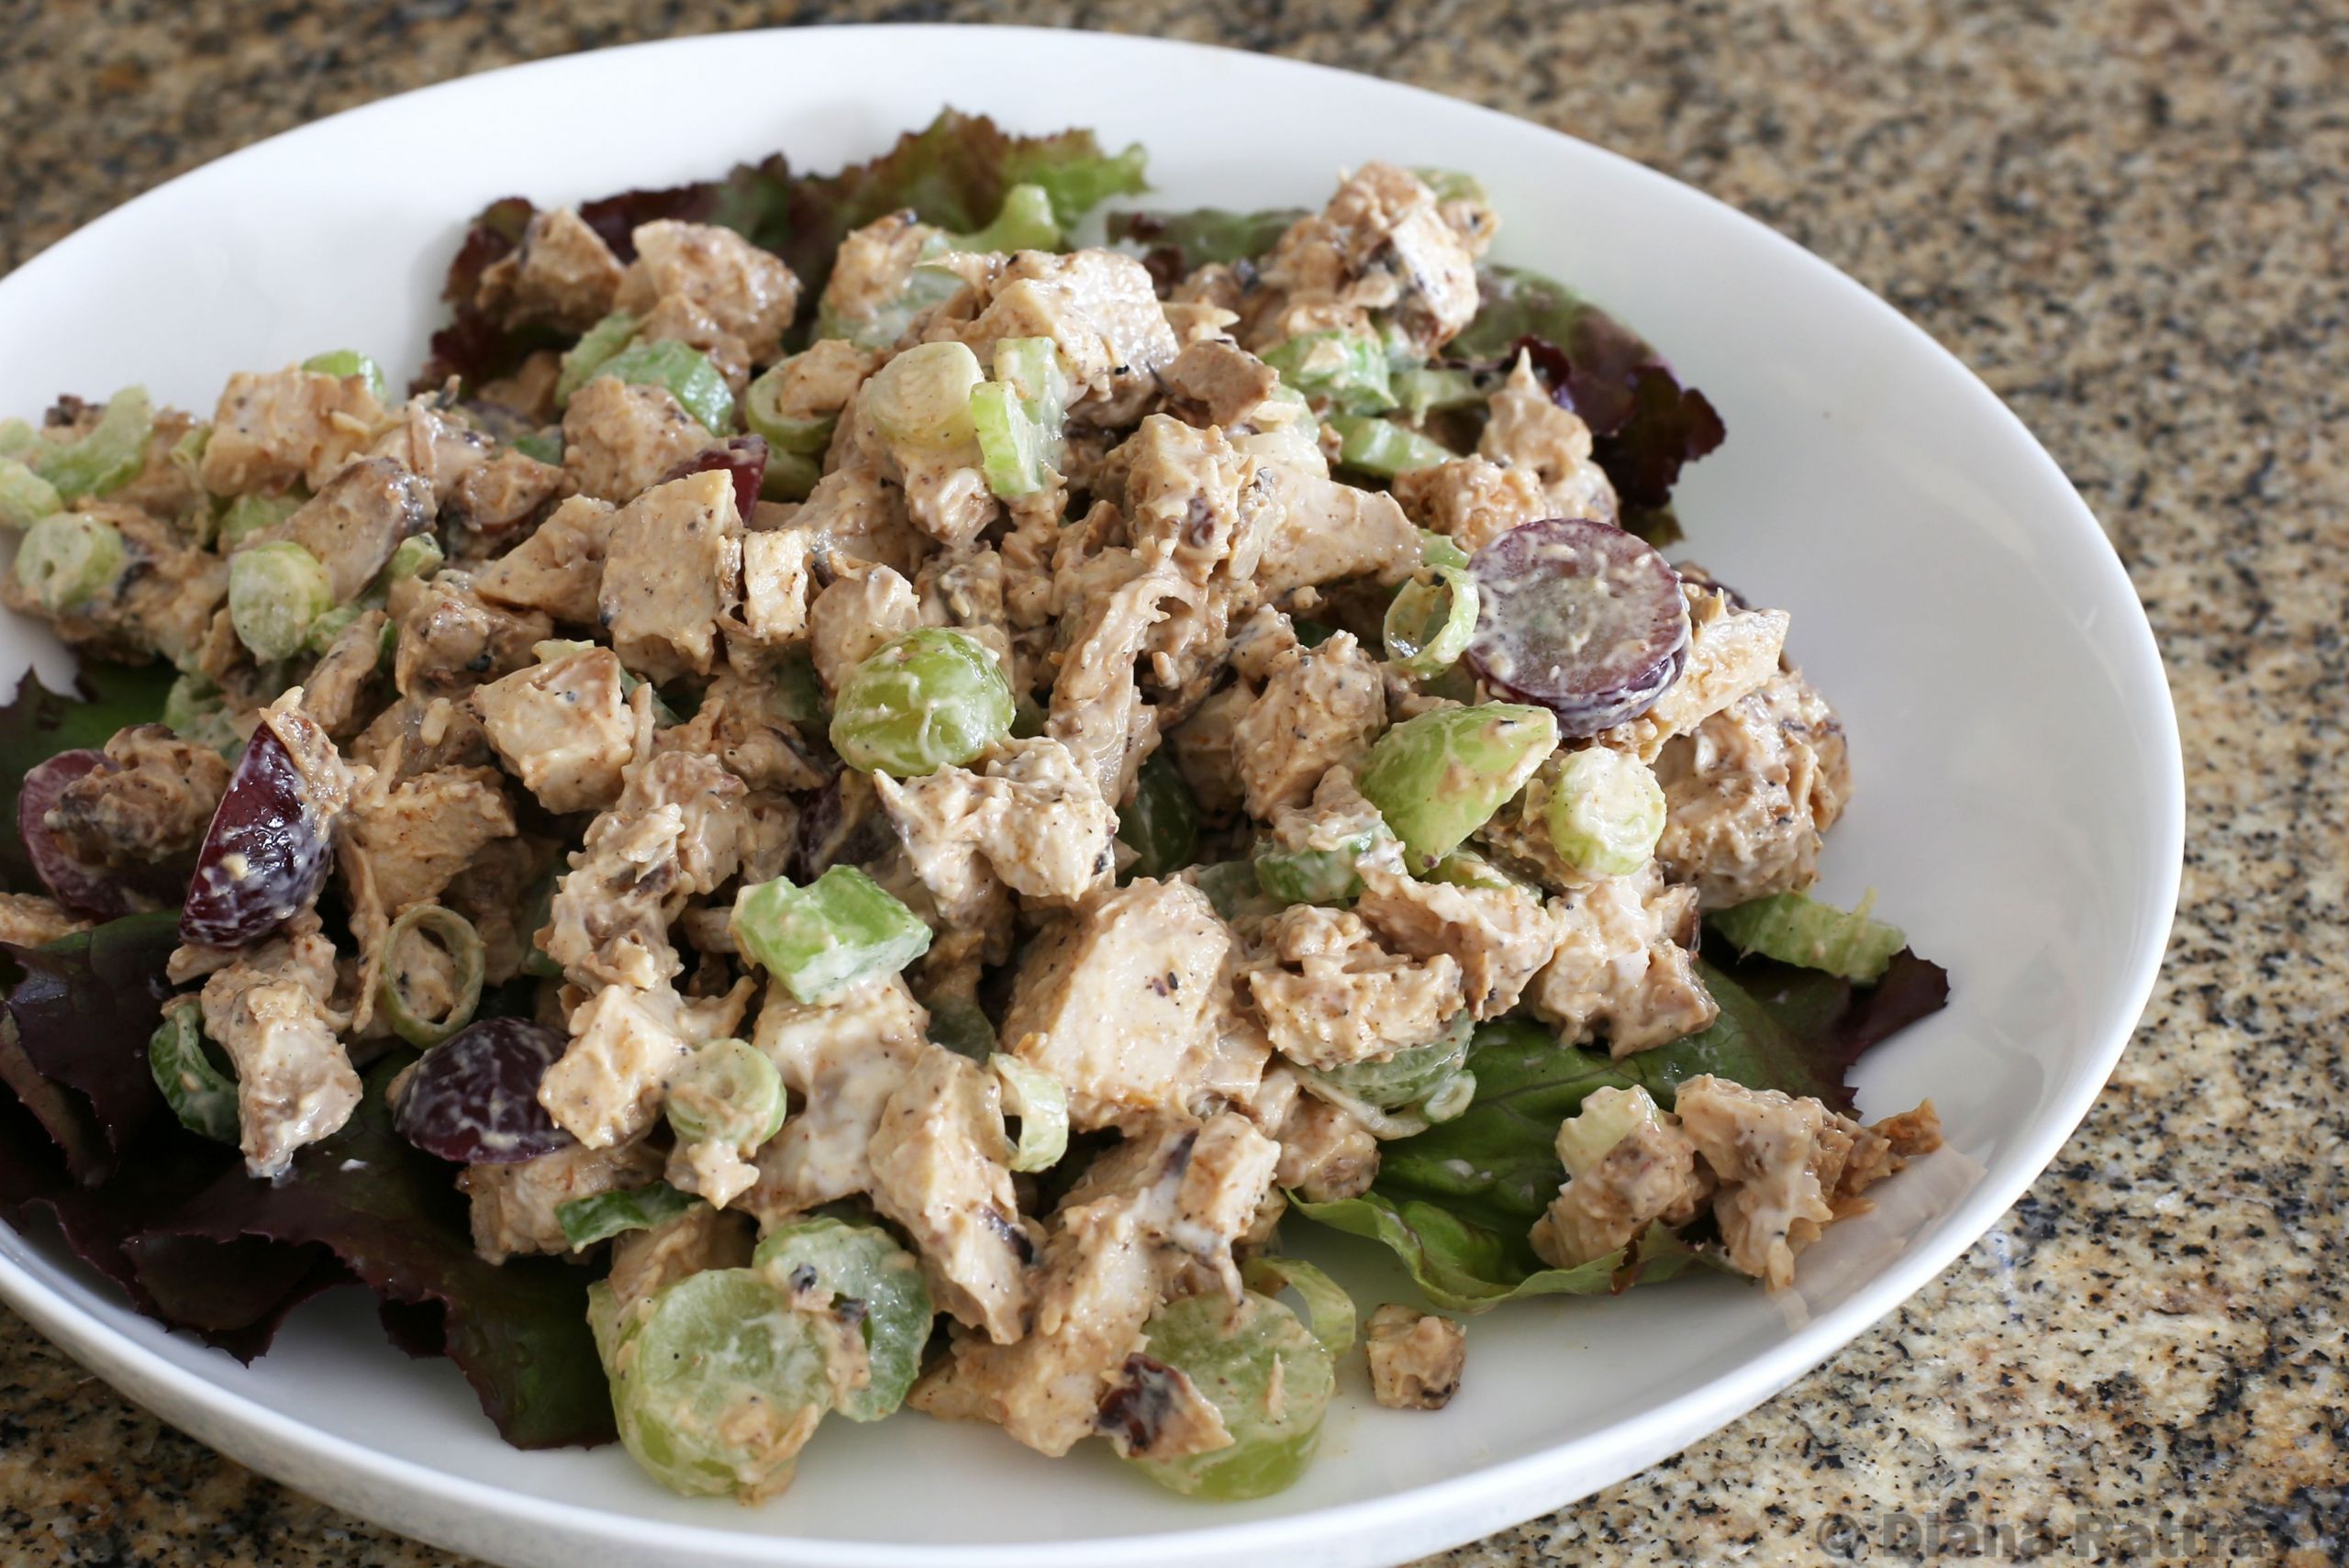 Easy Chicken Salad Recipe With Grapes
 Simple Chicken Salad With Grapes Recipe